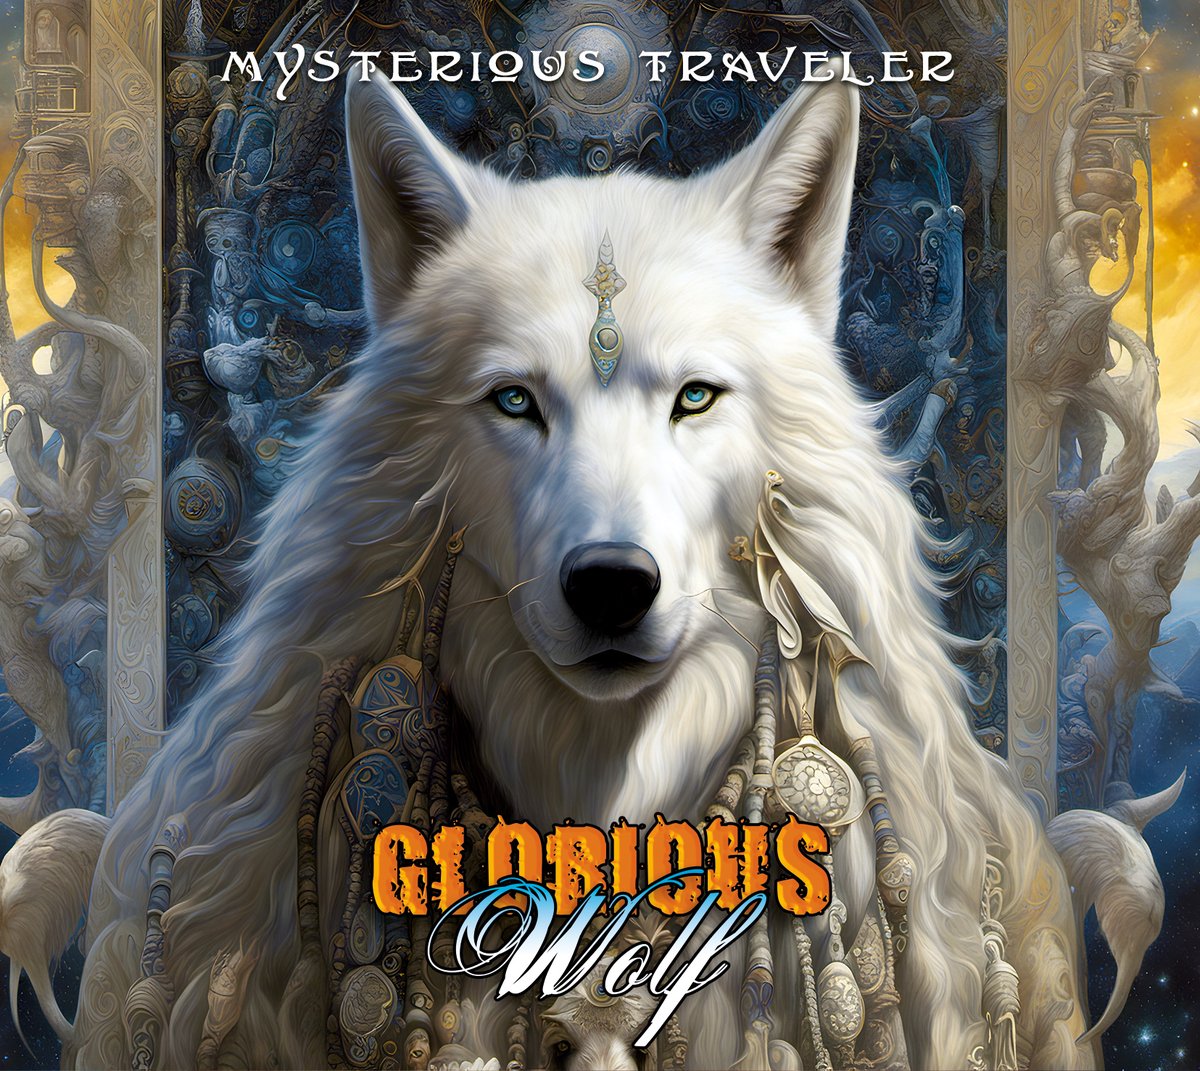 November 1st
New to 'Albums in the Spotlight'
Glorious Wolf - Mysterious Traveler
iskcrocks.com/?page_id=3428

Listening Links:
iskcrocks.com/?page_id=2046
iskcrocks.com/?page_id=10063

#GloriousWolf